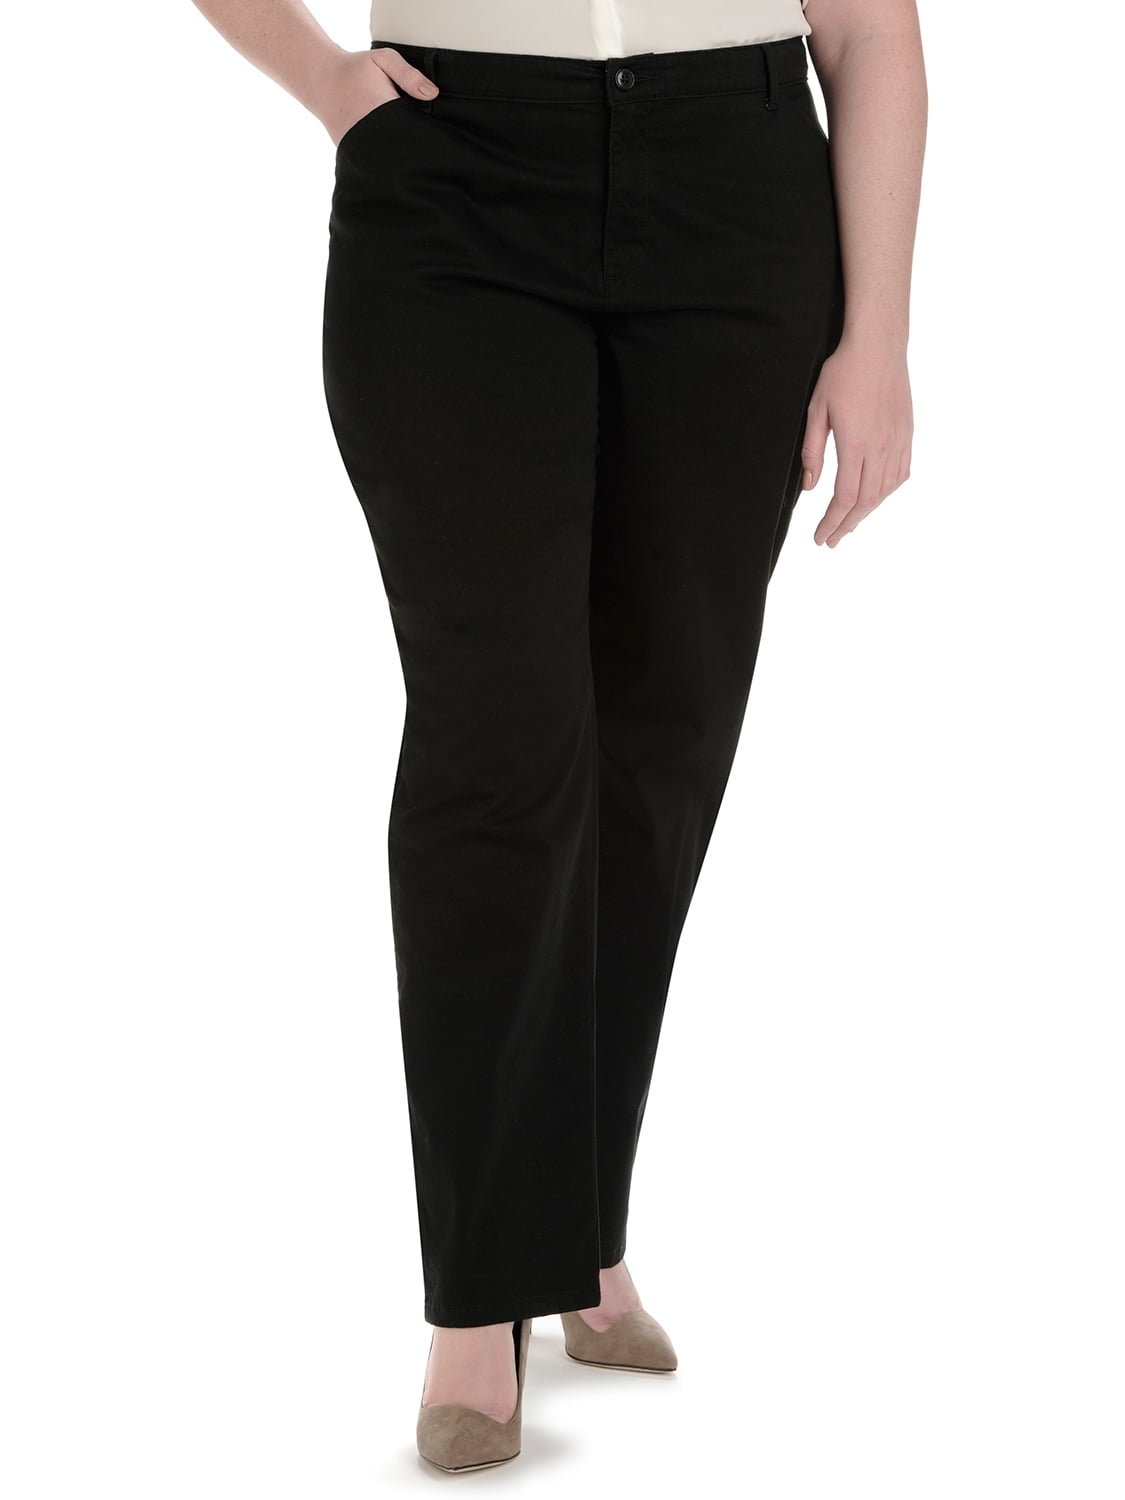 Casual LEE Womens Plus Size Relaxed-fit Side-Elastic Pant